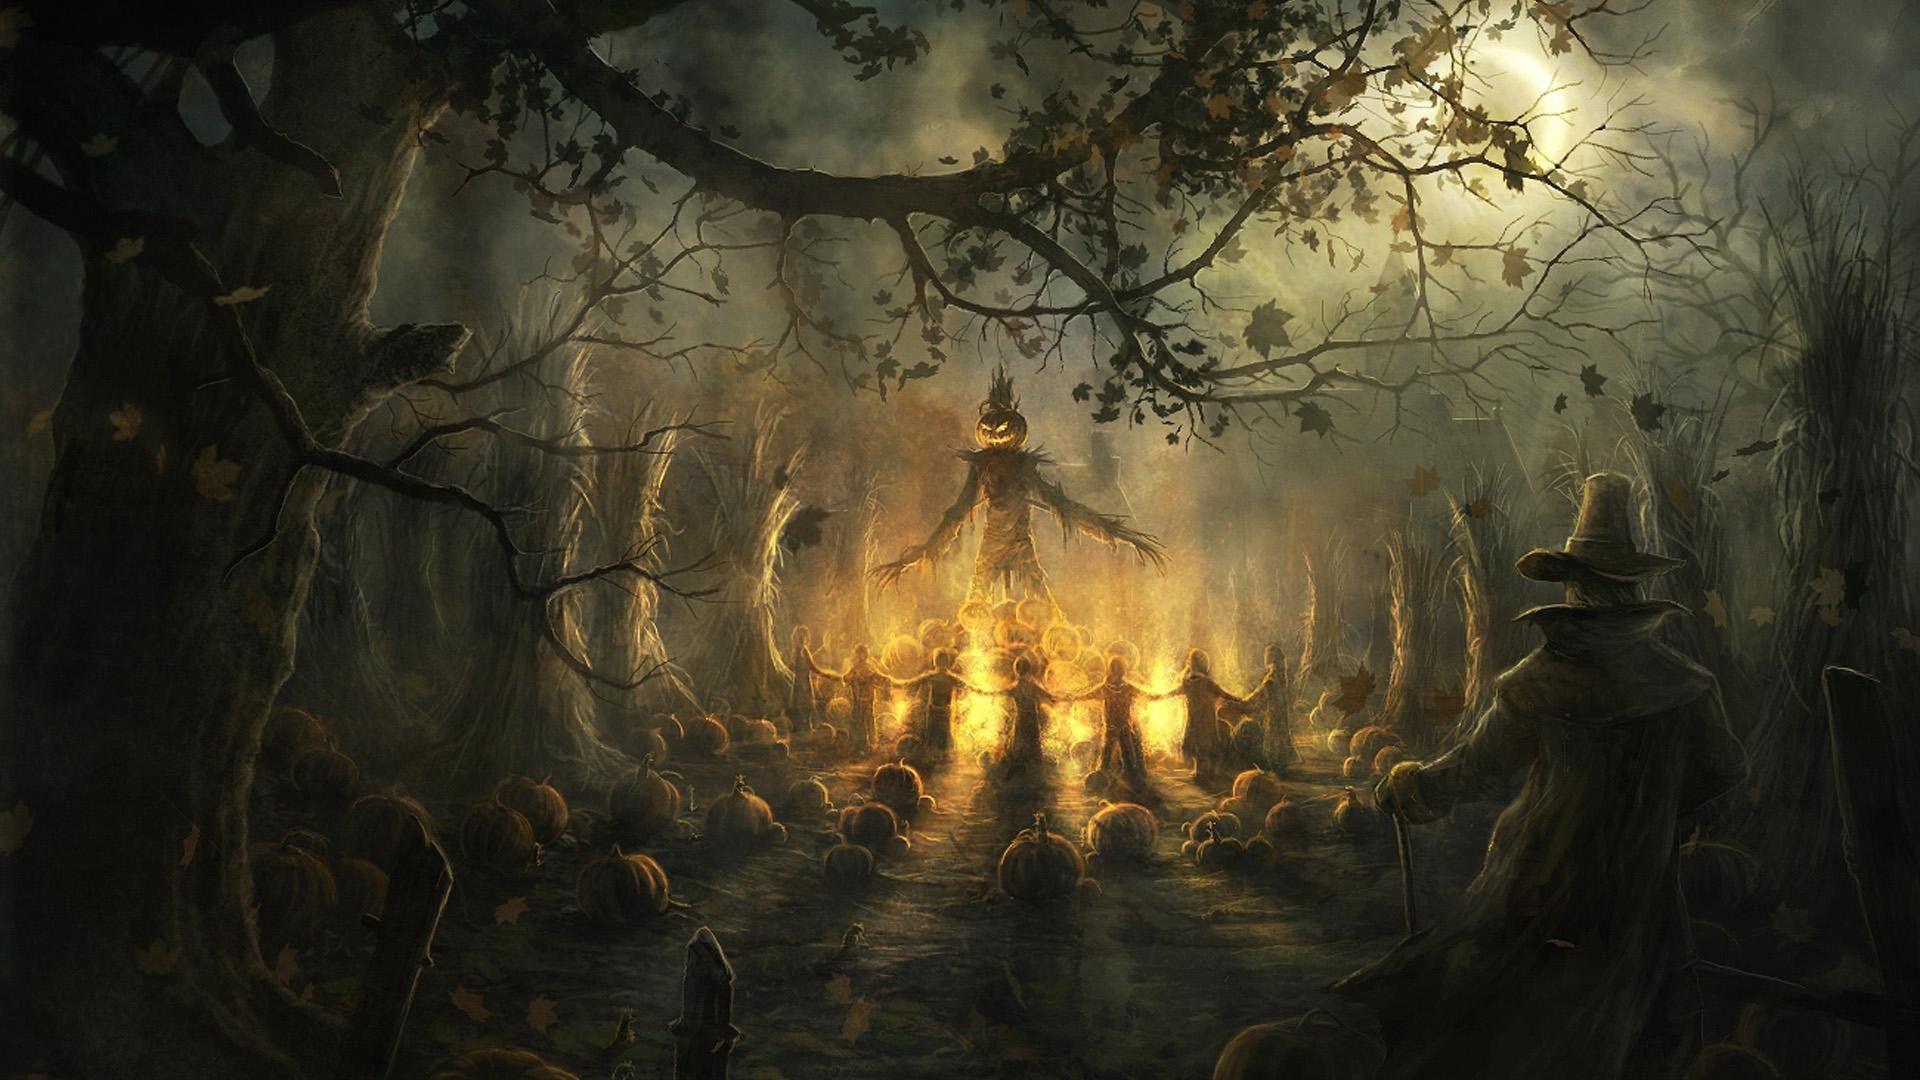 Cool Halloween Wallpaper Scary Free Event Photo 1920x1080PX